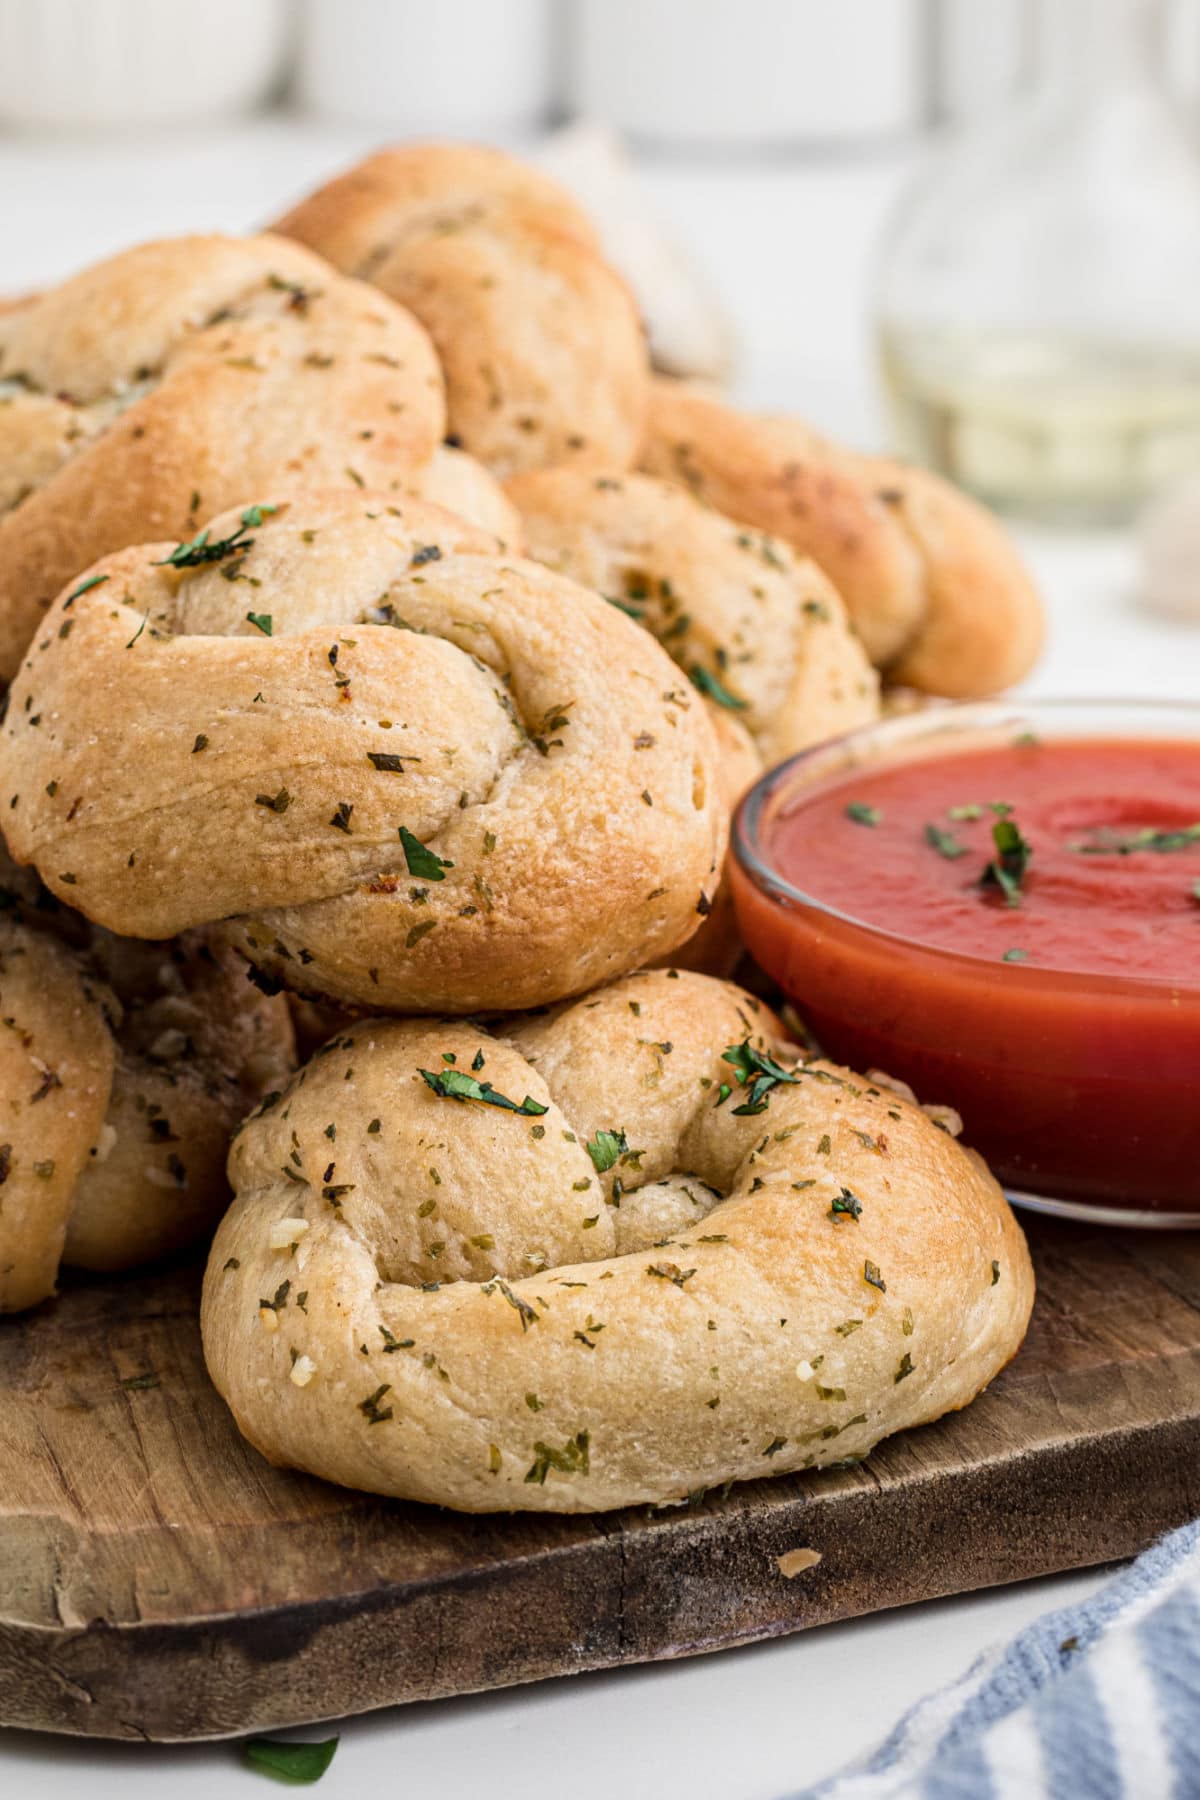 A pile of garlic knot rolls on a table.